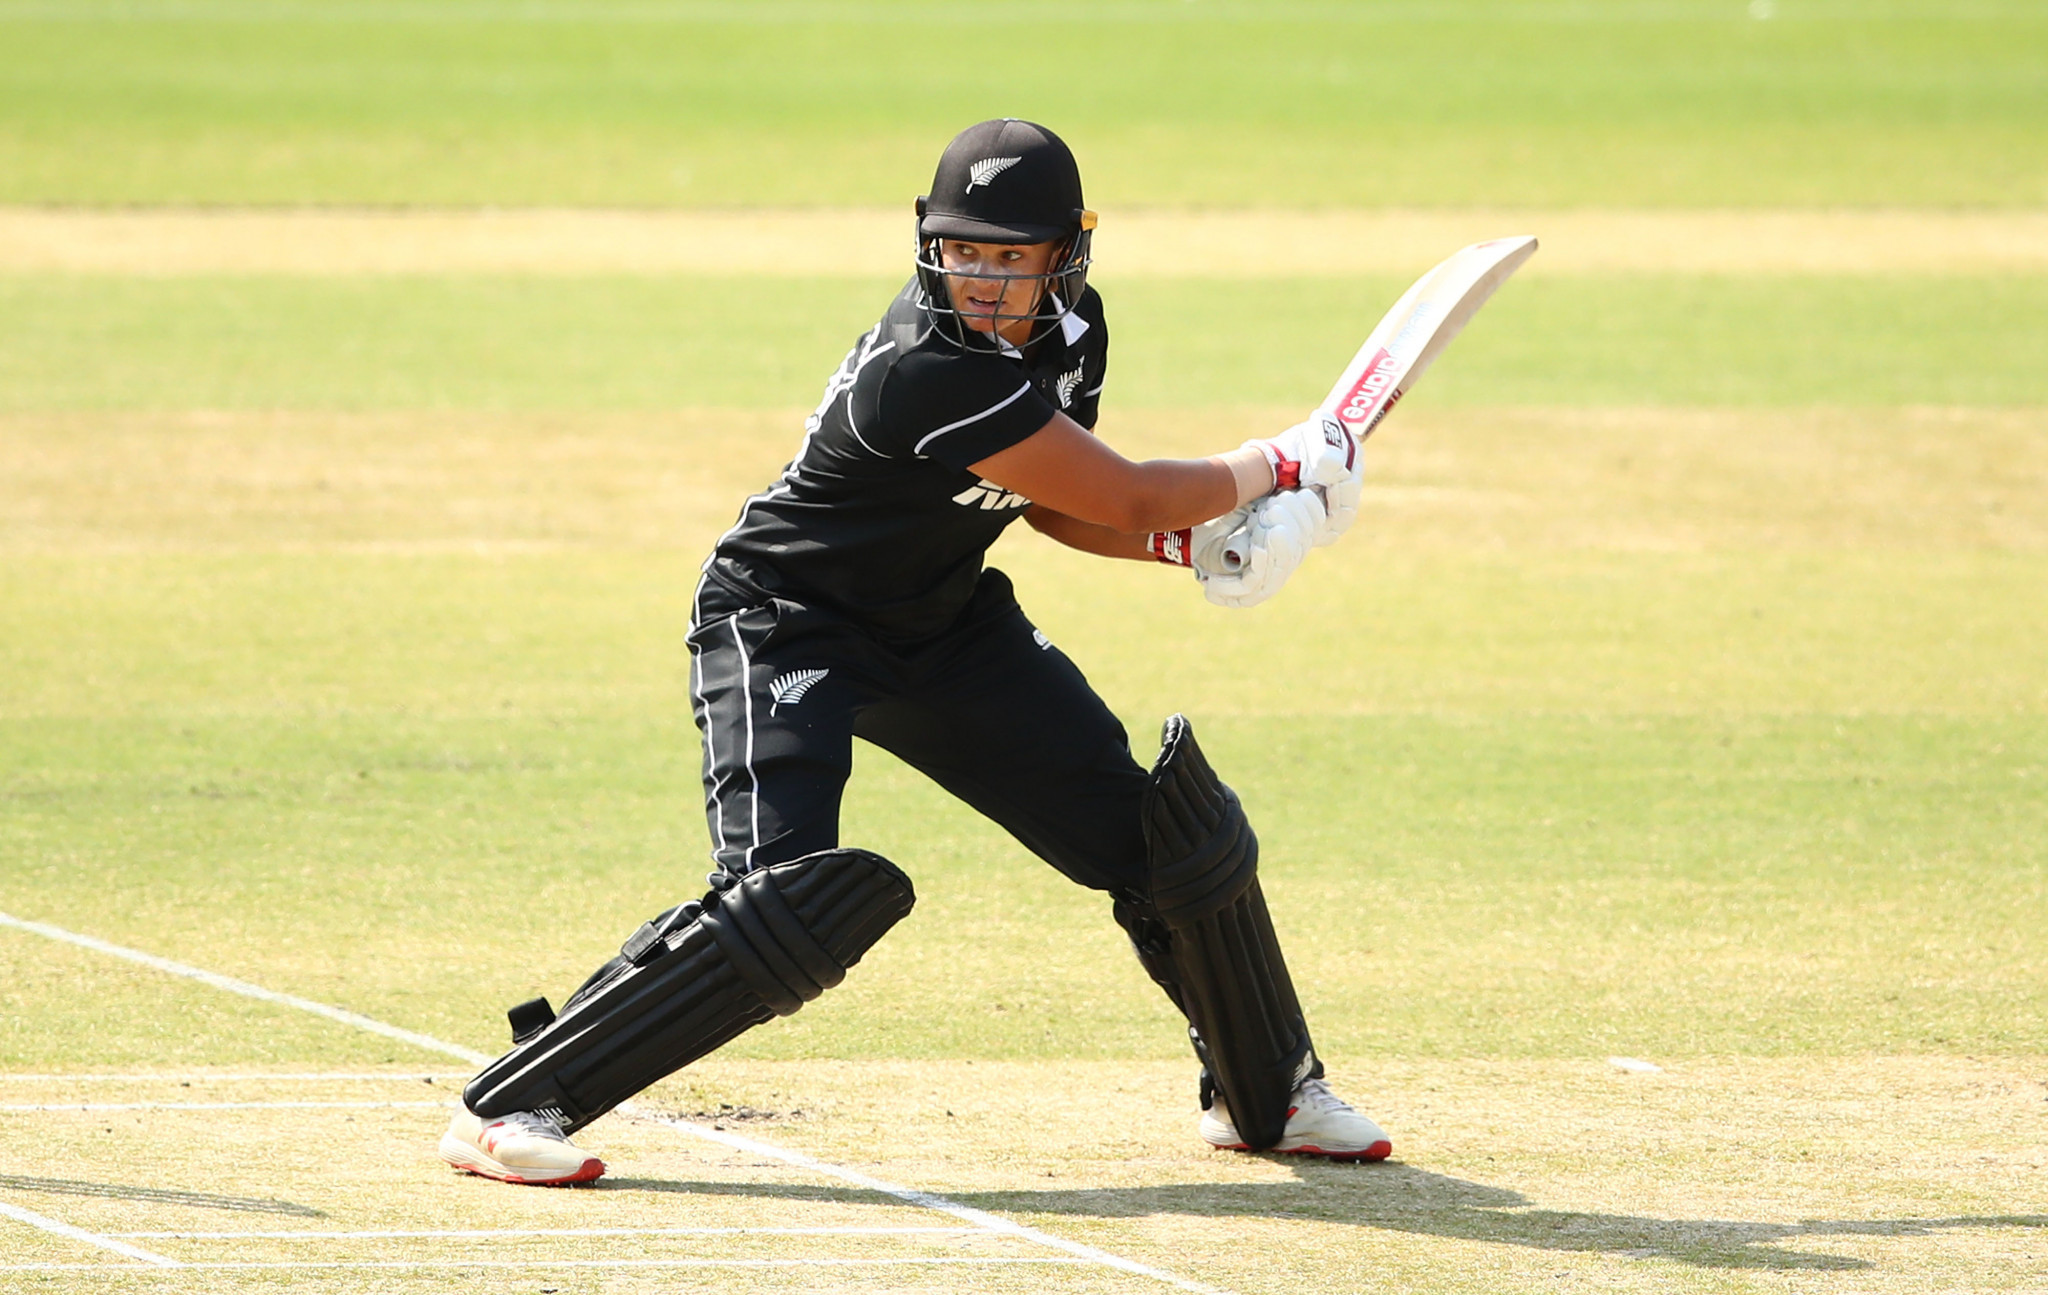 Former New Zealand women's captain Suzie Bates said the inclusion of women's cricket at Birmingham 2022 would be a game-changer ©Getty Images